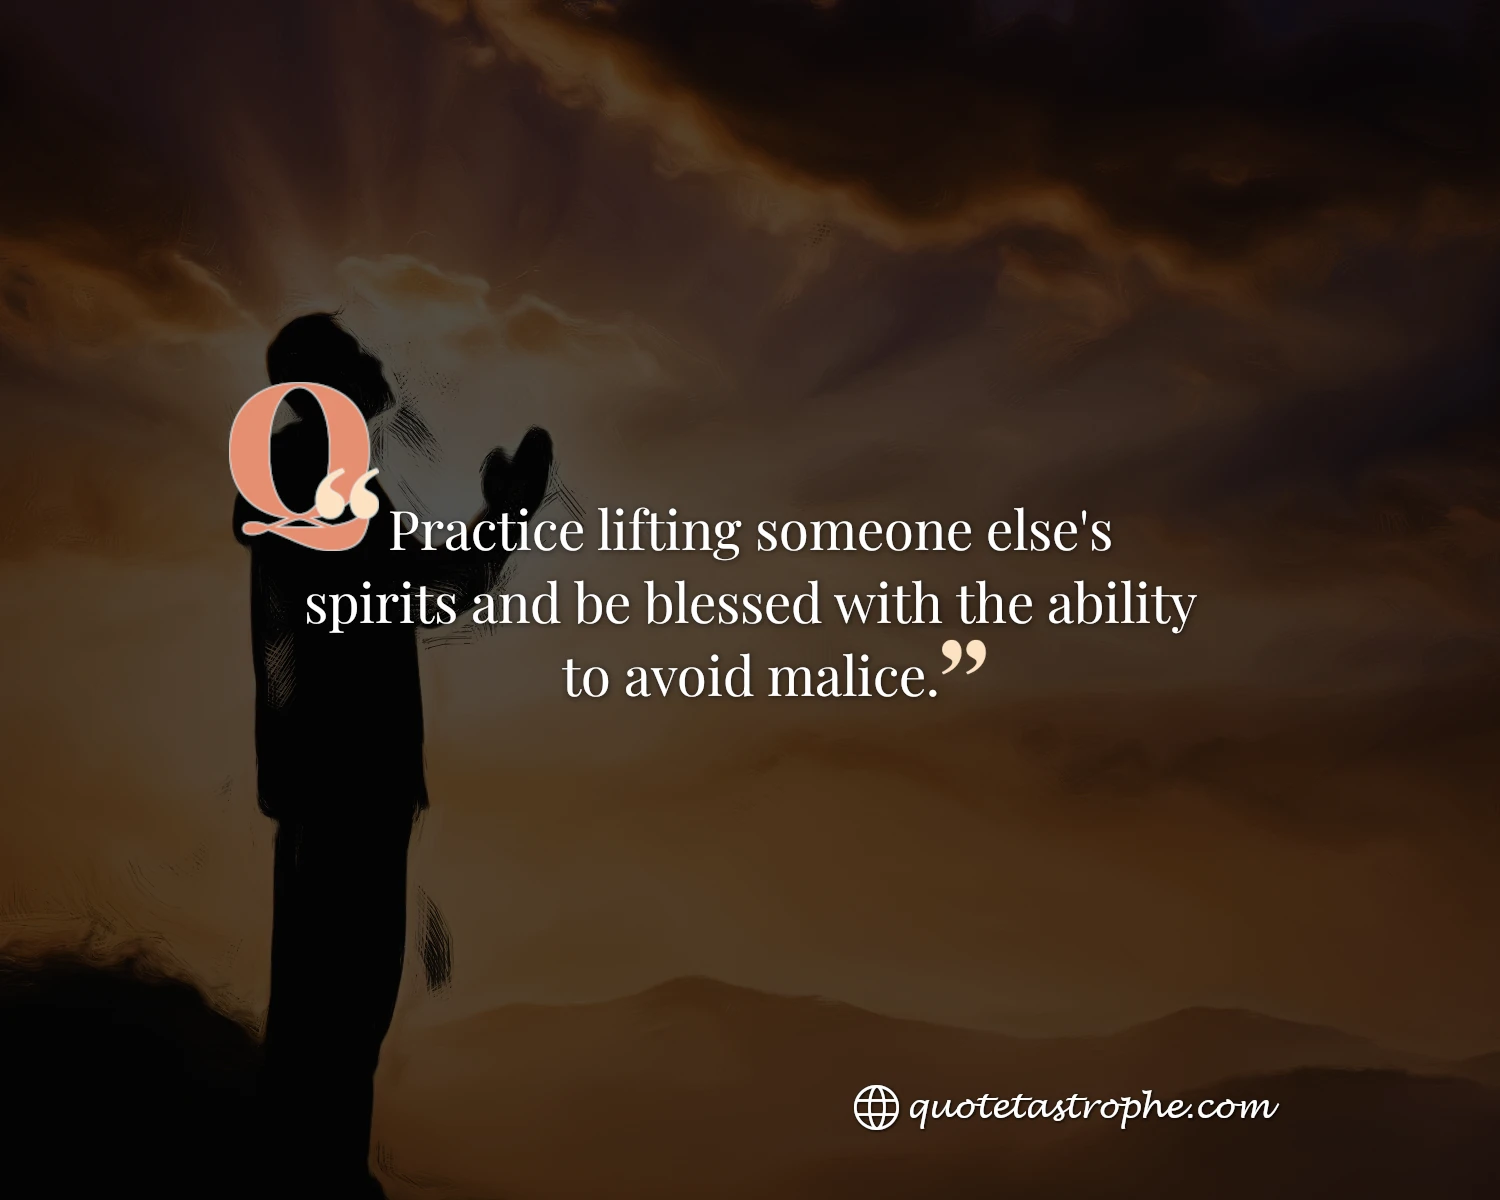 Practice Lifting Someone Else's Spirits and be Blessed